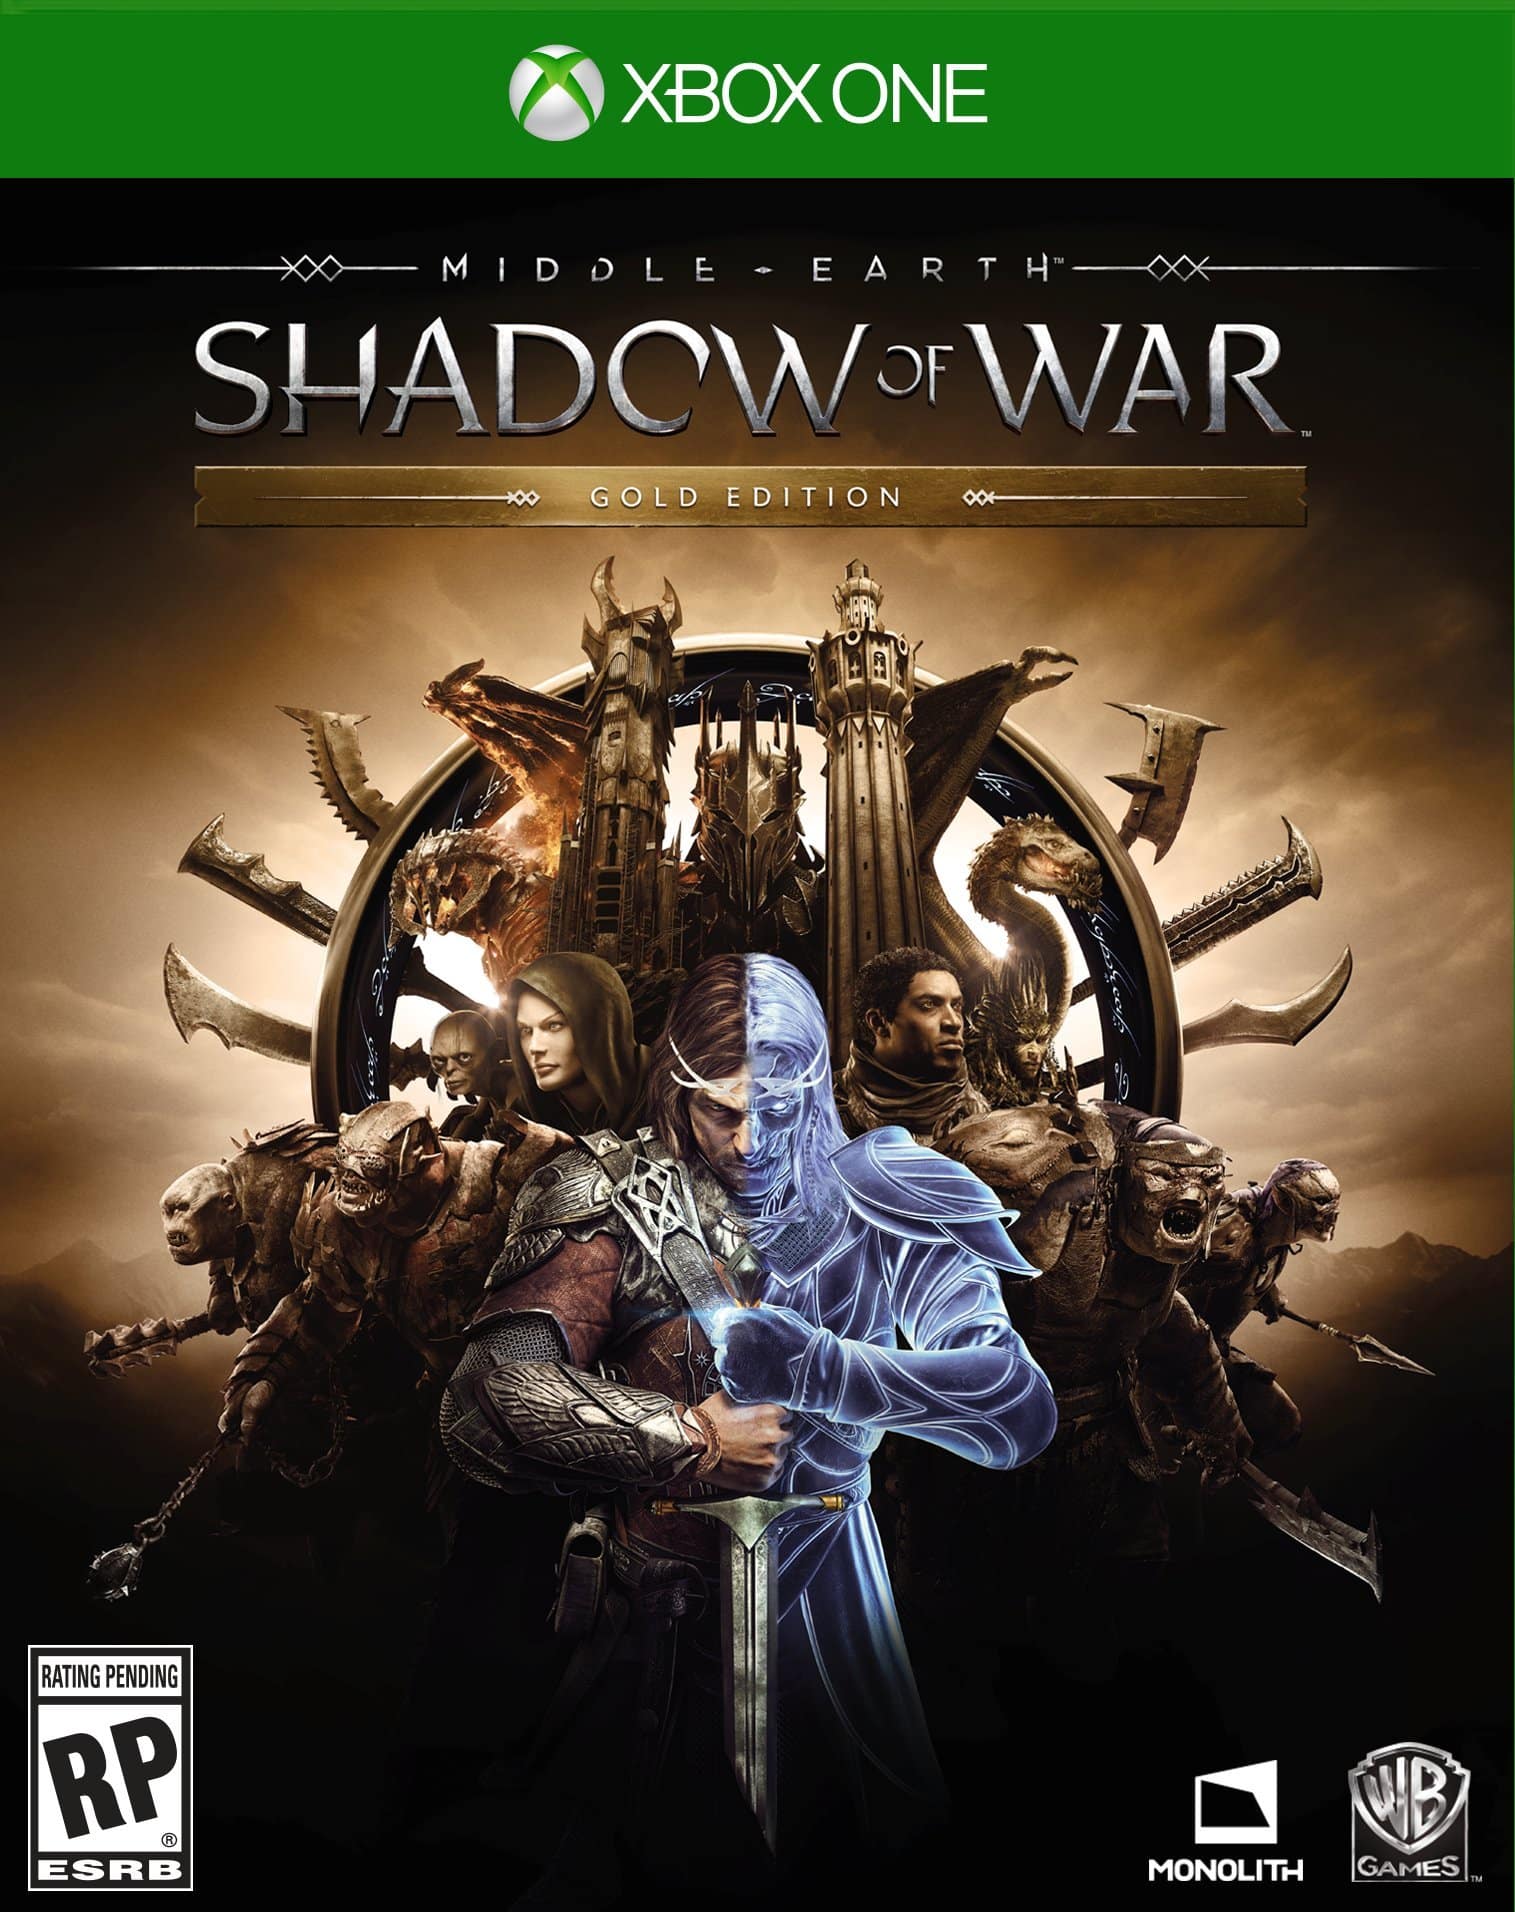 Middle-earth: Shadow of War Xbox One Gold Edition